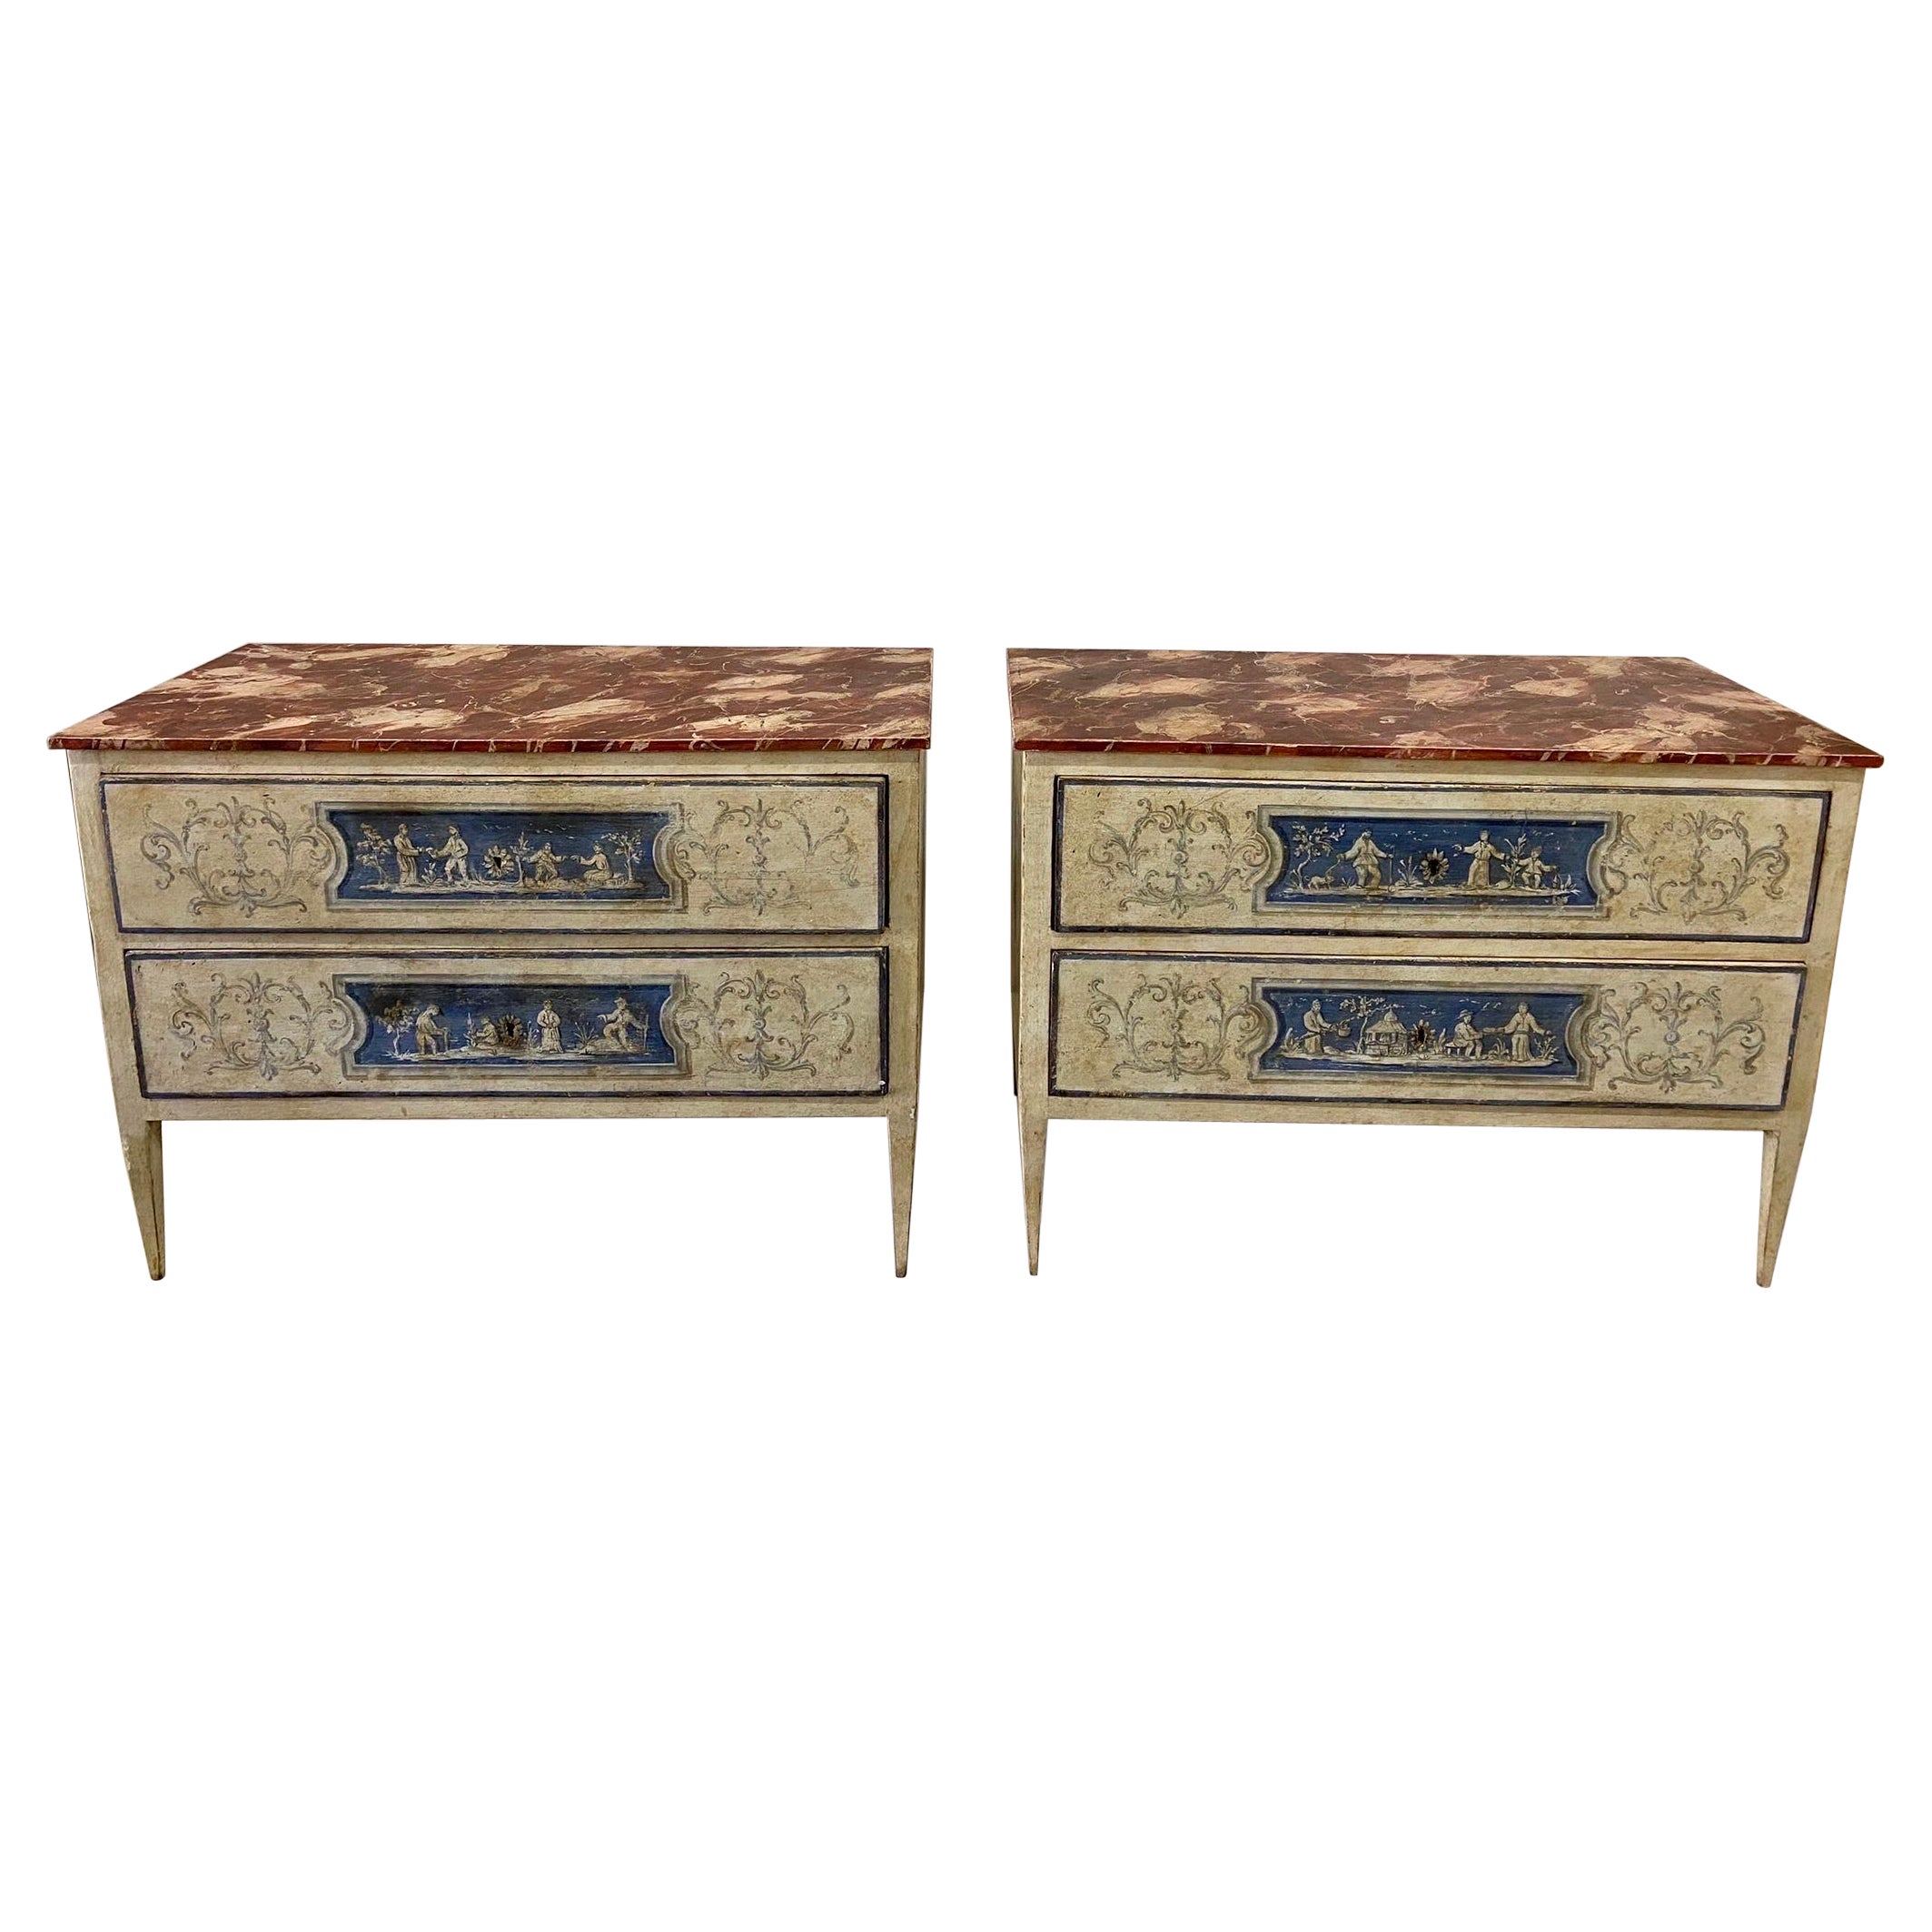 Pair of Venetian Painted Neoclassical Commodes